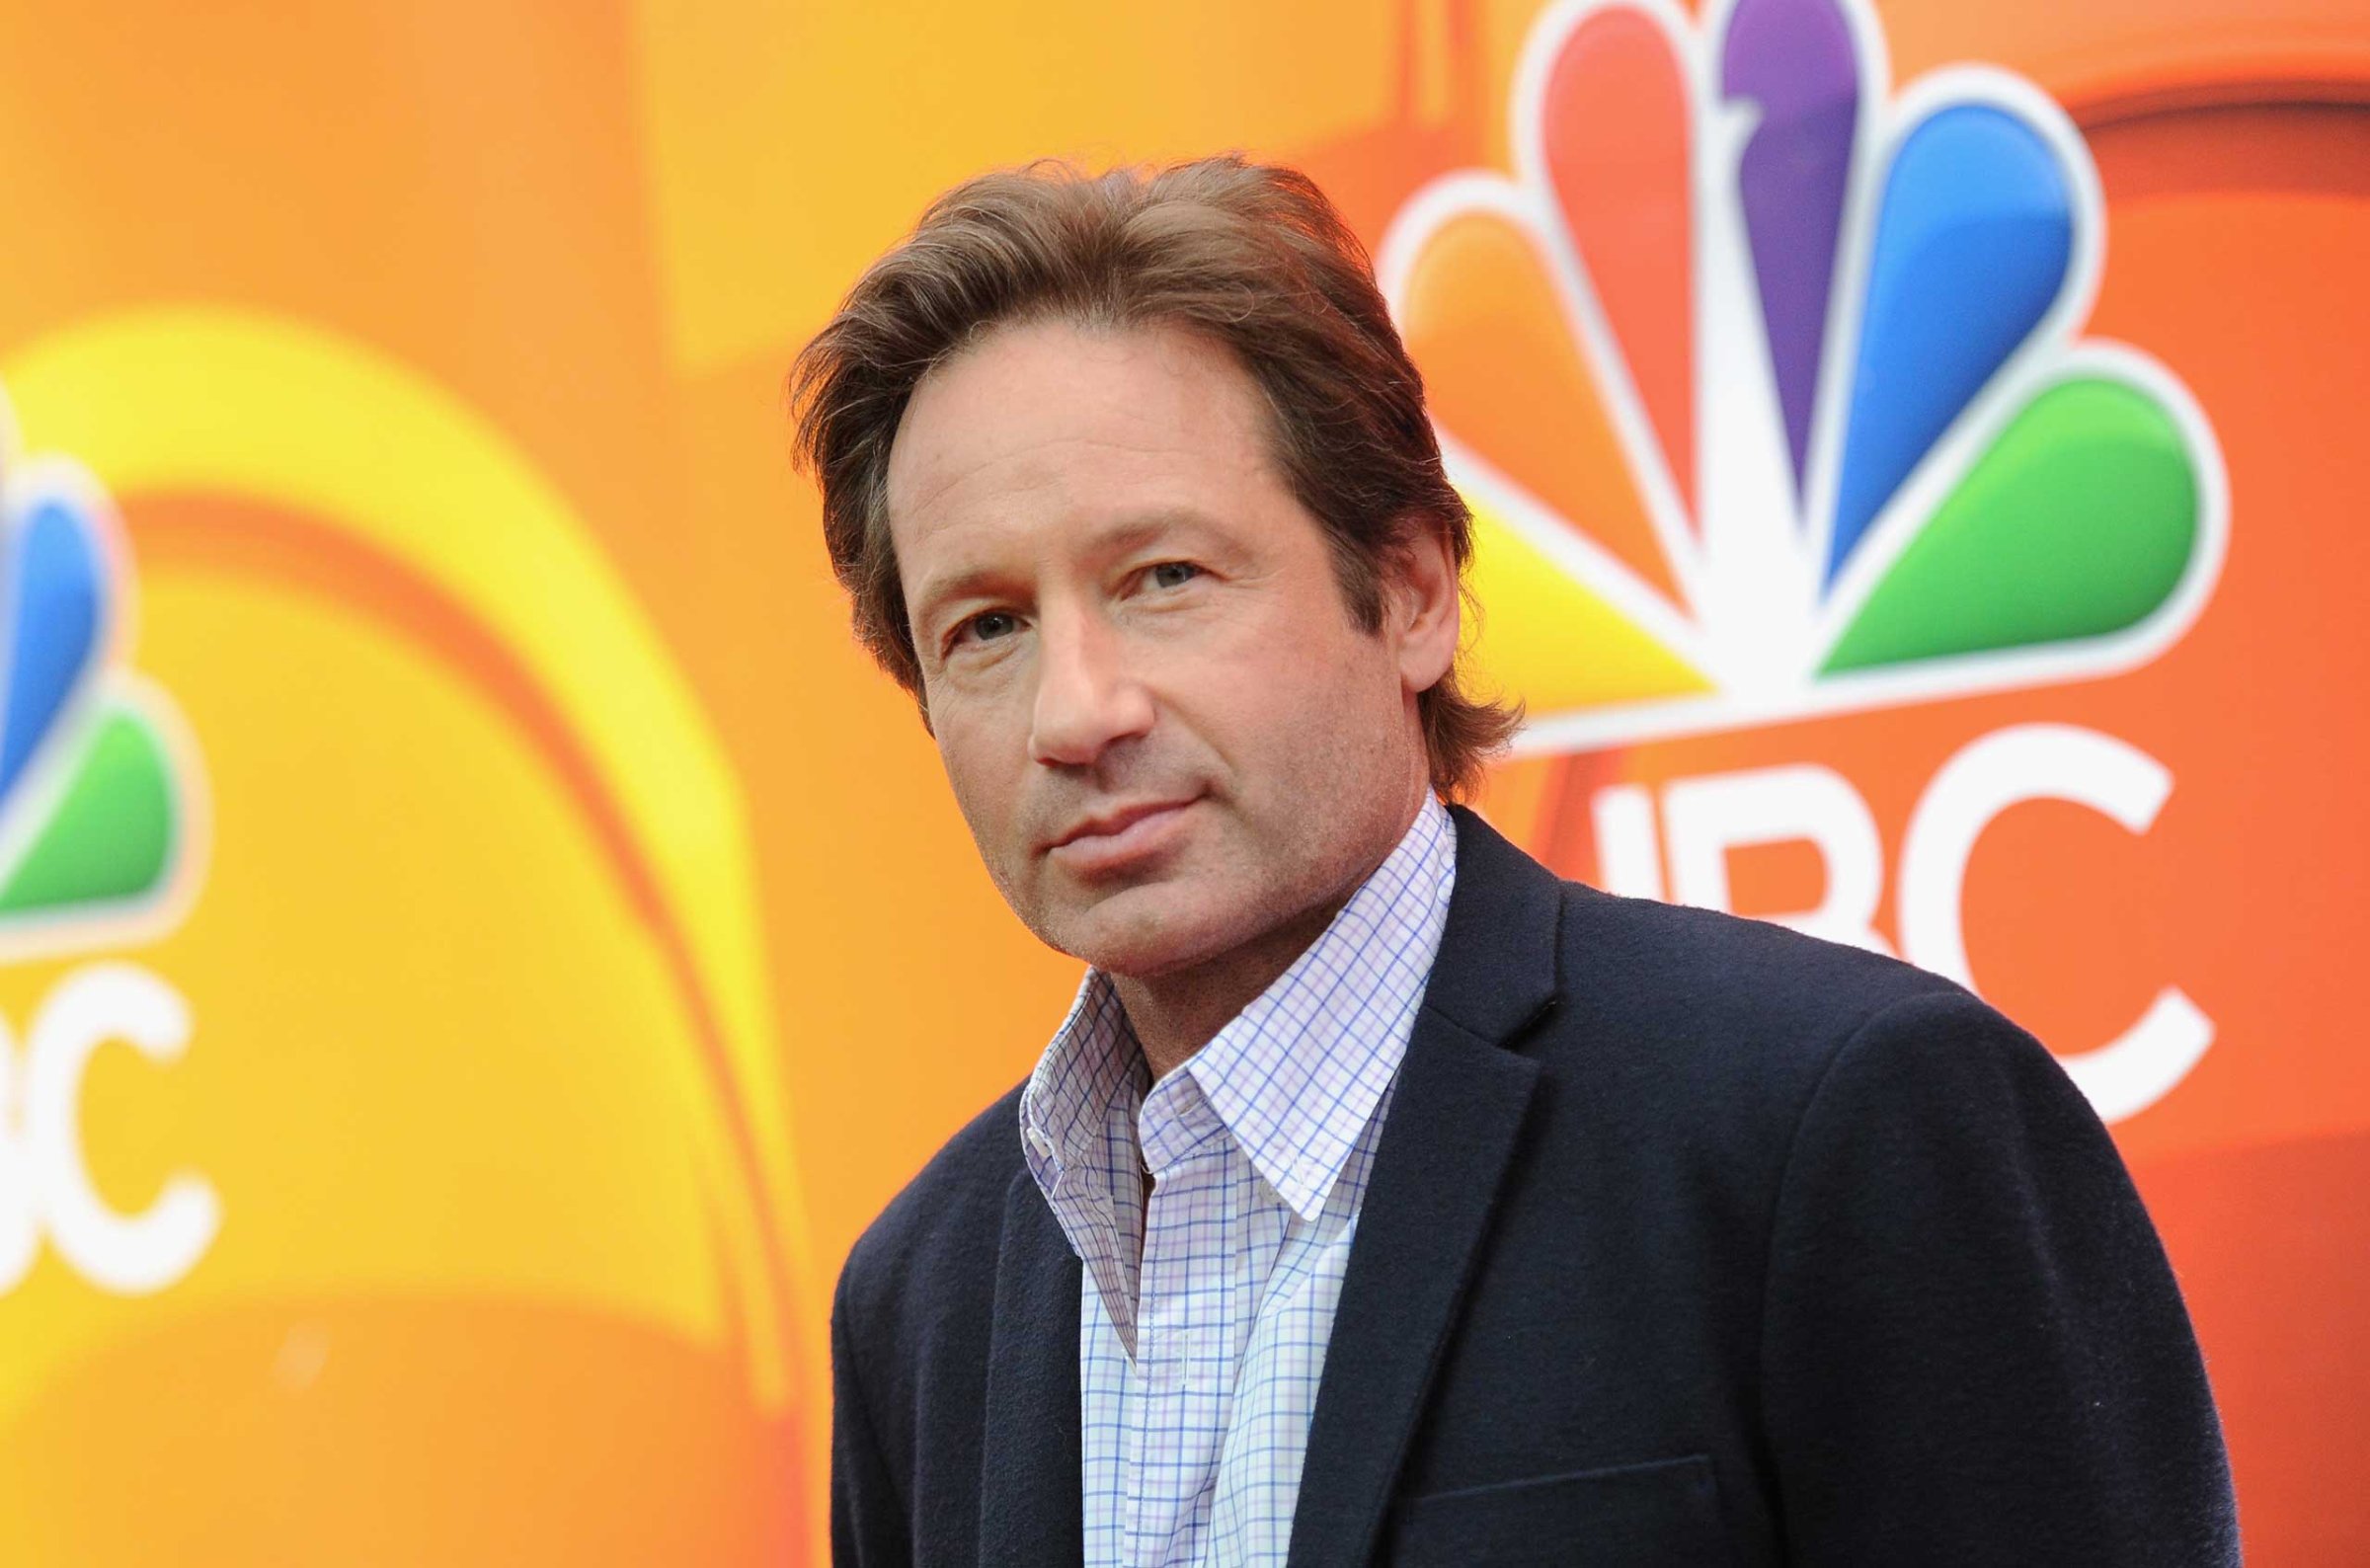 David Duchovny at Radio City Music Hall in New York on May 11, 2015.